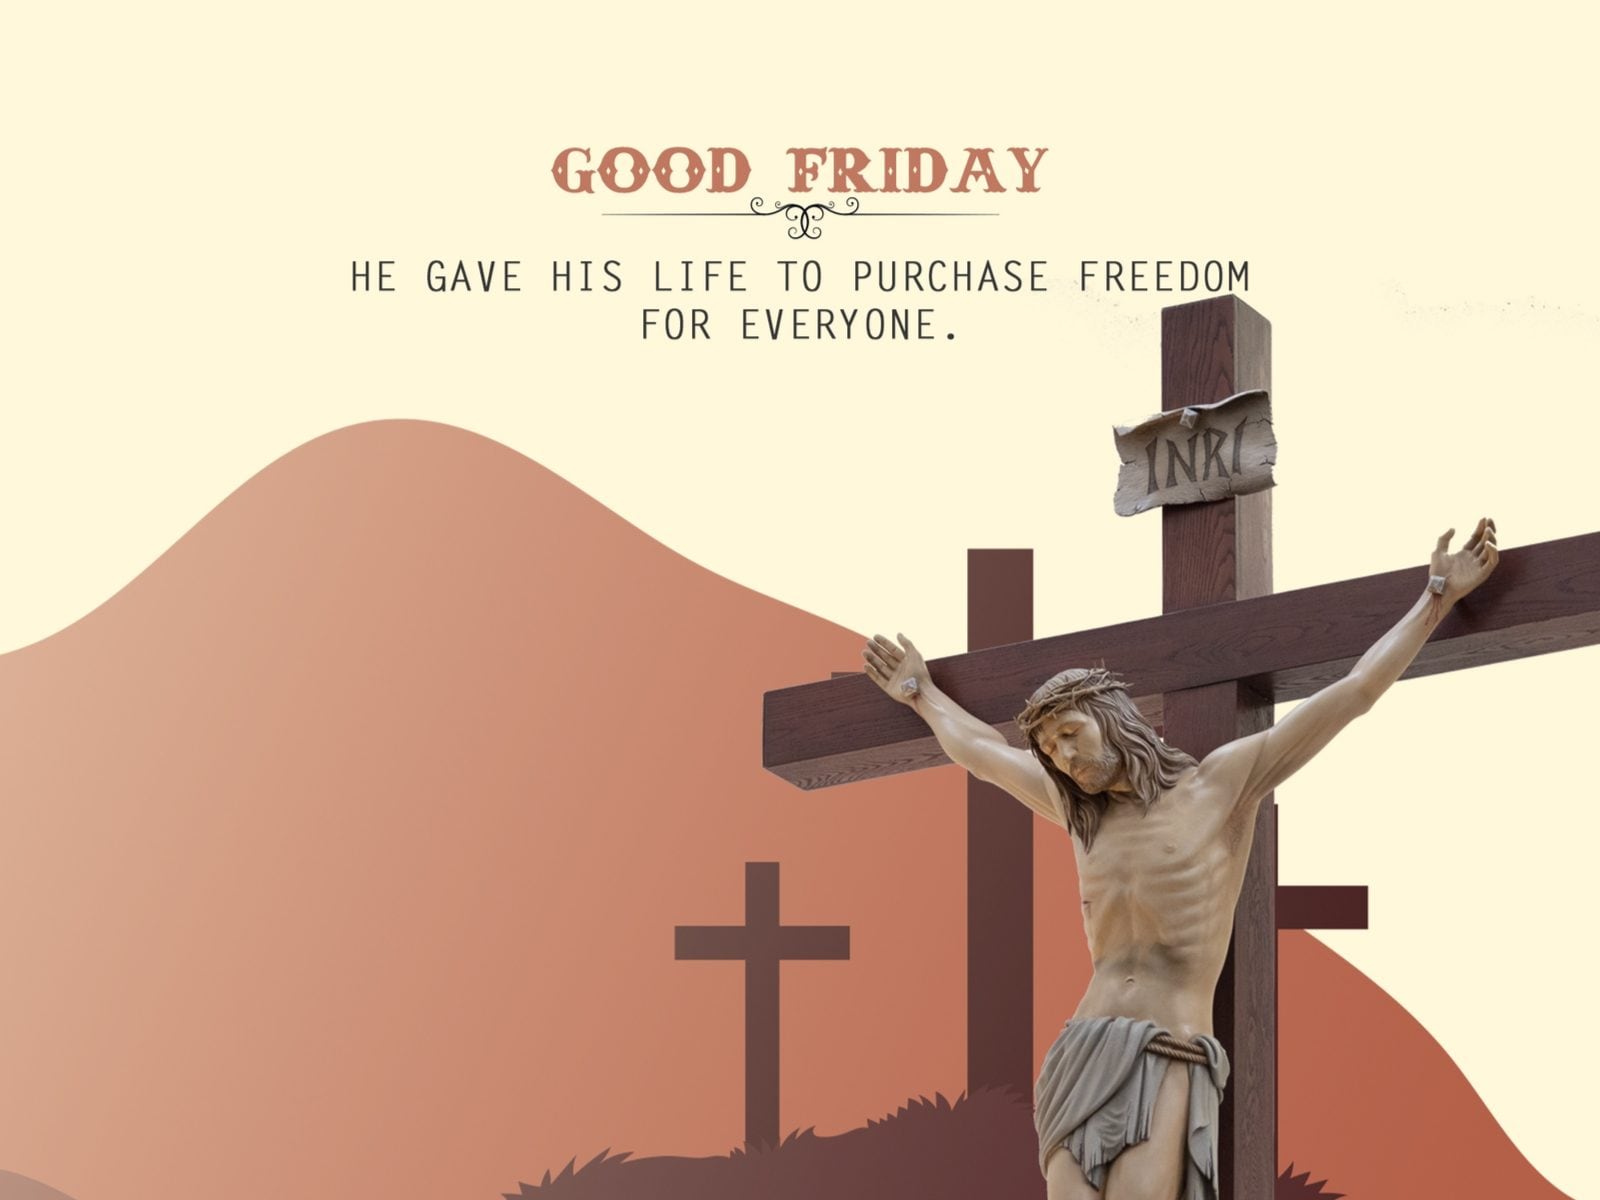 Good Friday 2022: Wishes, Images, Status, Quotes, Messages and WhatsApp  Greetings to Share